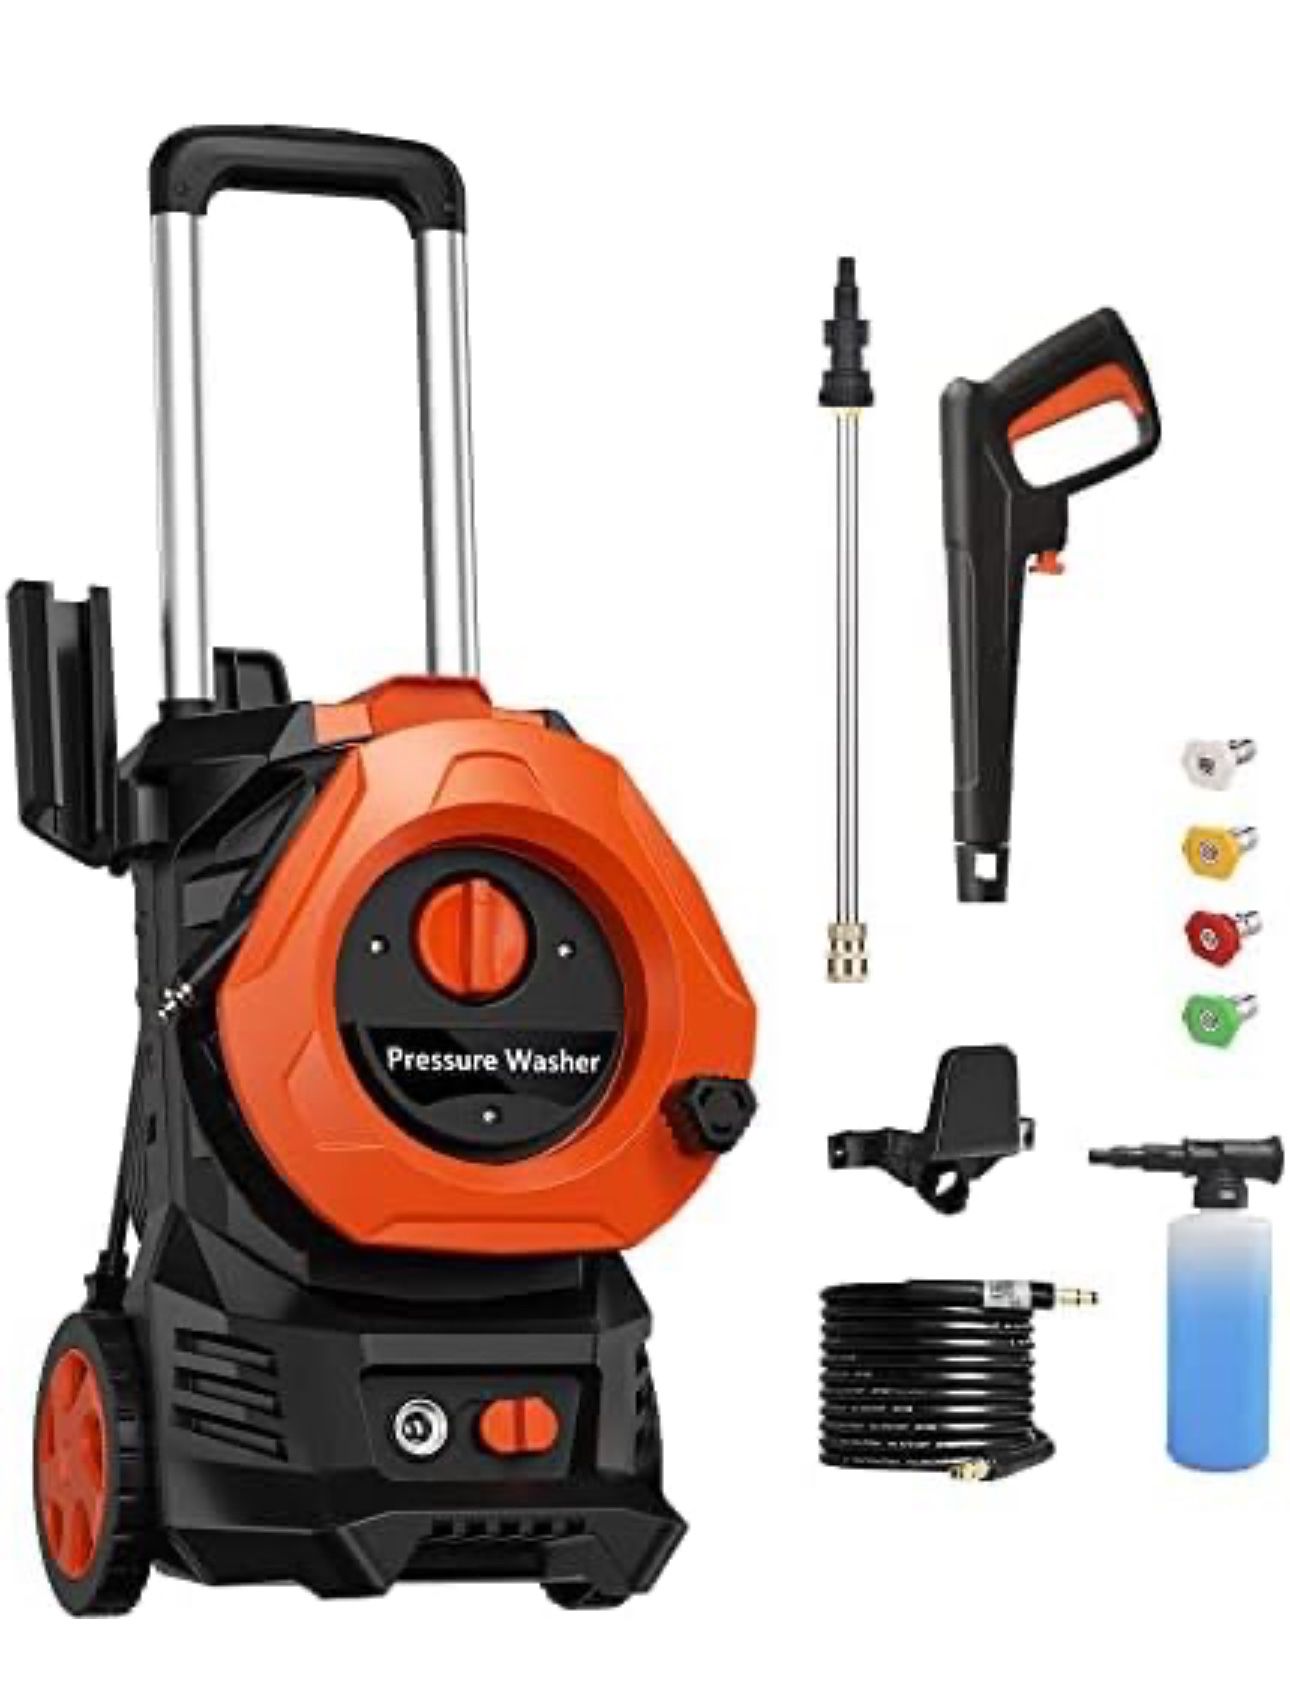 Electric Pressure Washer 1800 PSI Max 1.5 GPM with 25ft Hose/16ft Power Cord,Making It Perfect for Cleaning Cars, Pool, Patios Orange